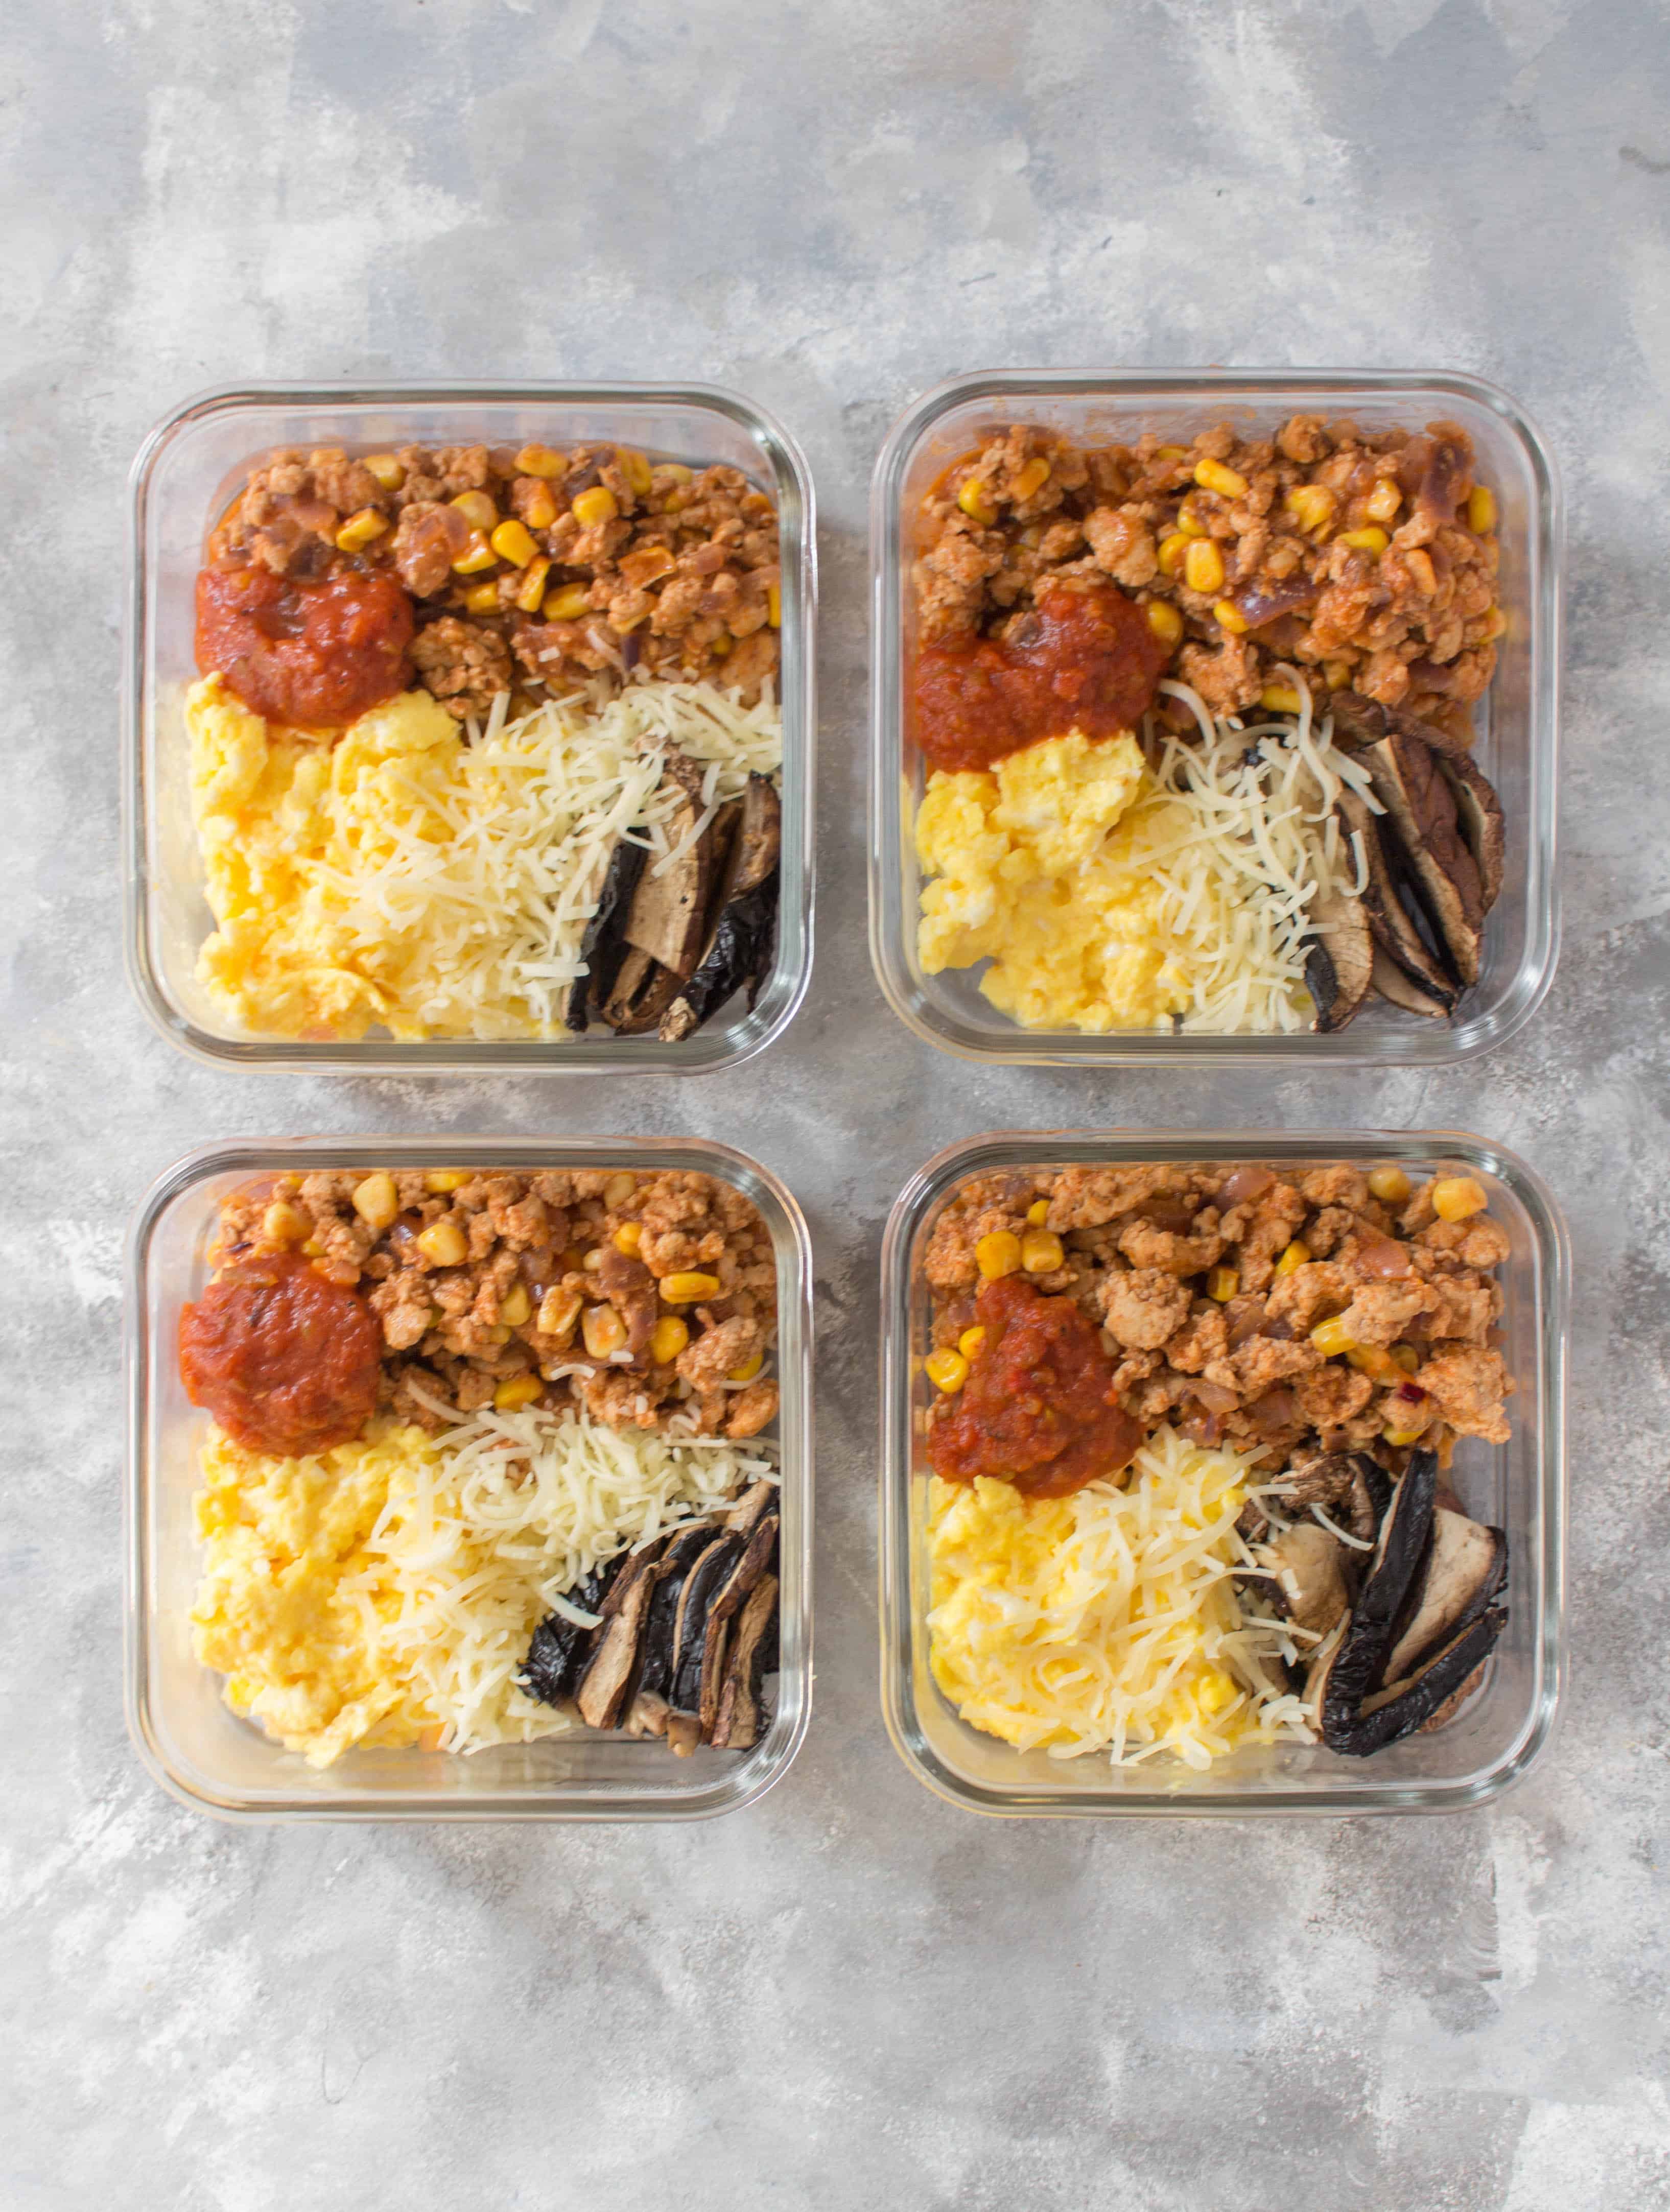 Go to bed excited for the morning with this delicious make ahead breakfast taco egg bowl! The perfect meal prep to get through the mornings and a fun way to celebrate World Egg Day!